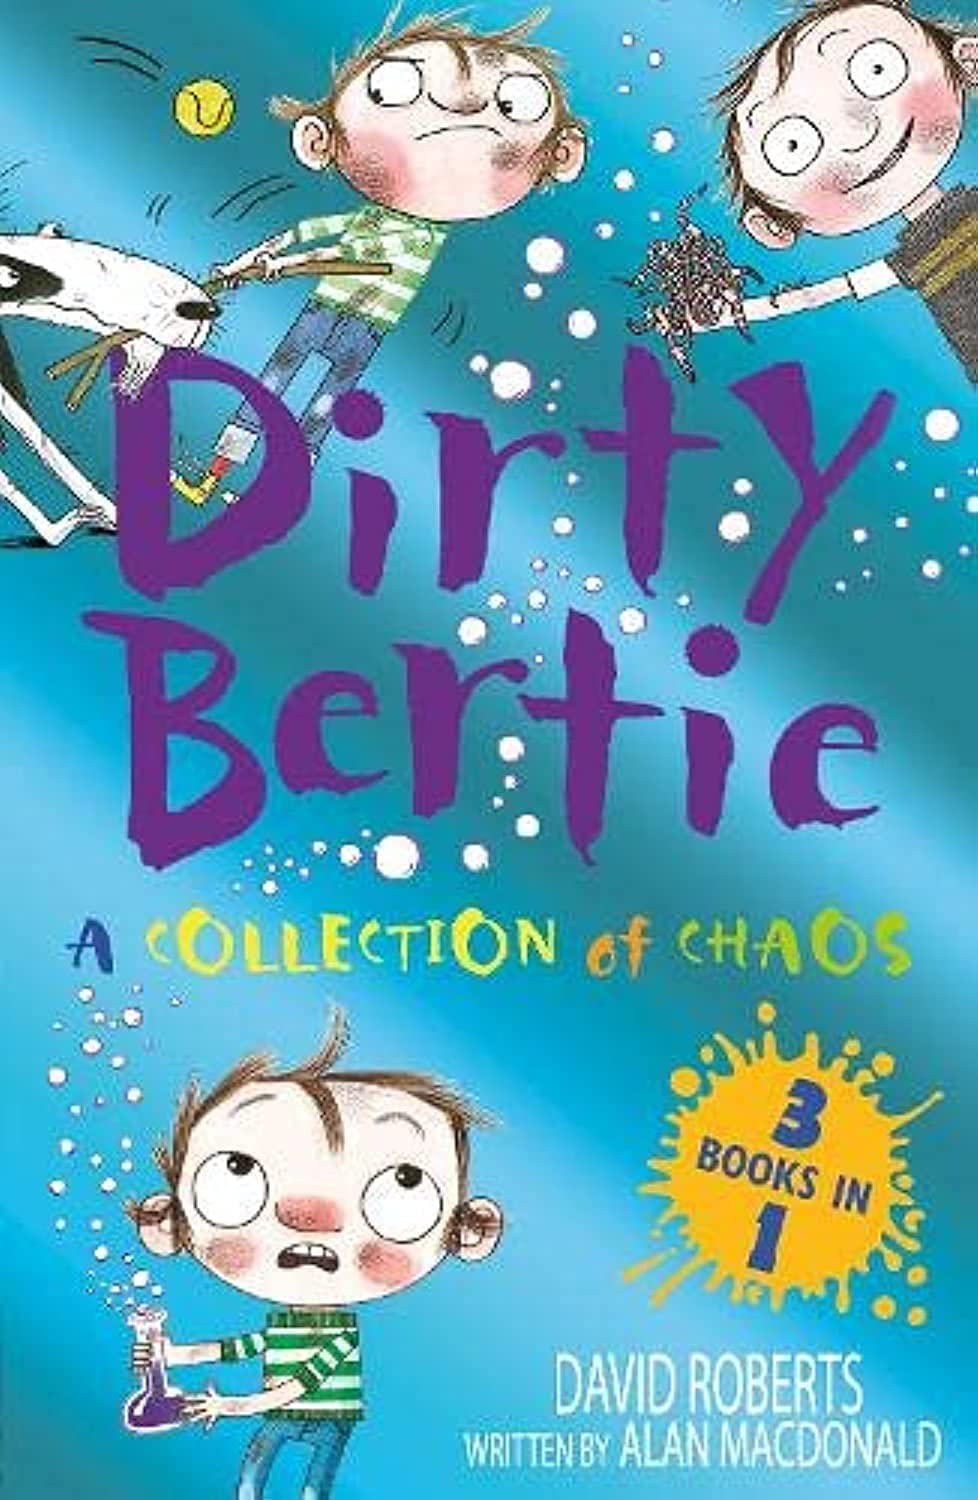 A Collection of Chaos (Dirty Bertie)